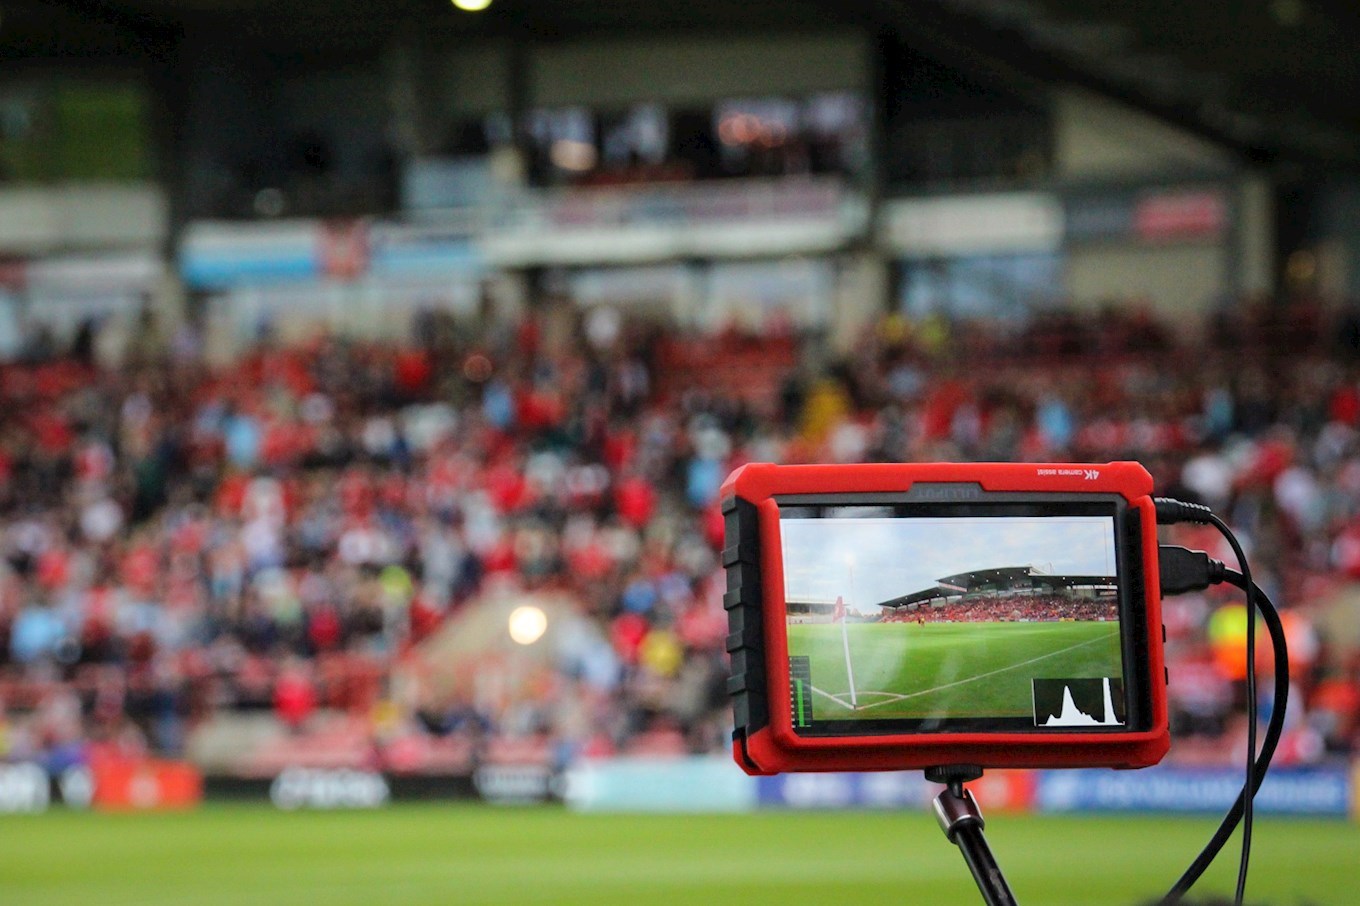 TV/STREAMING How to watch Wrexham AFC vs Bromley - News